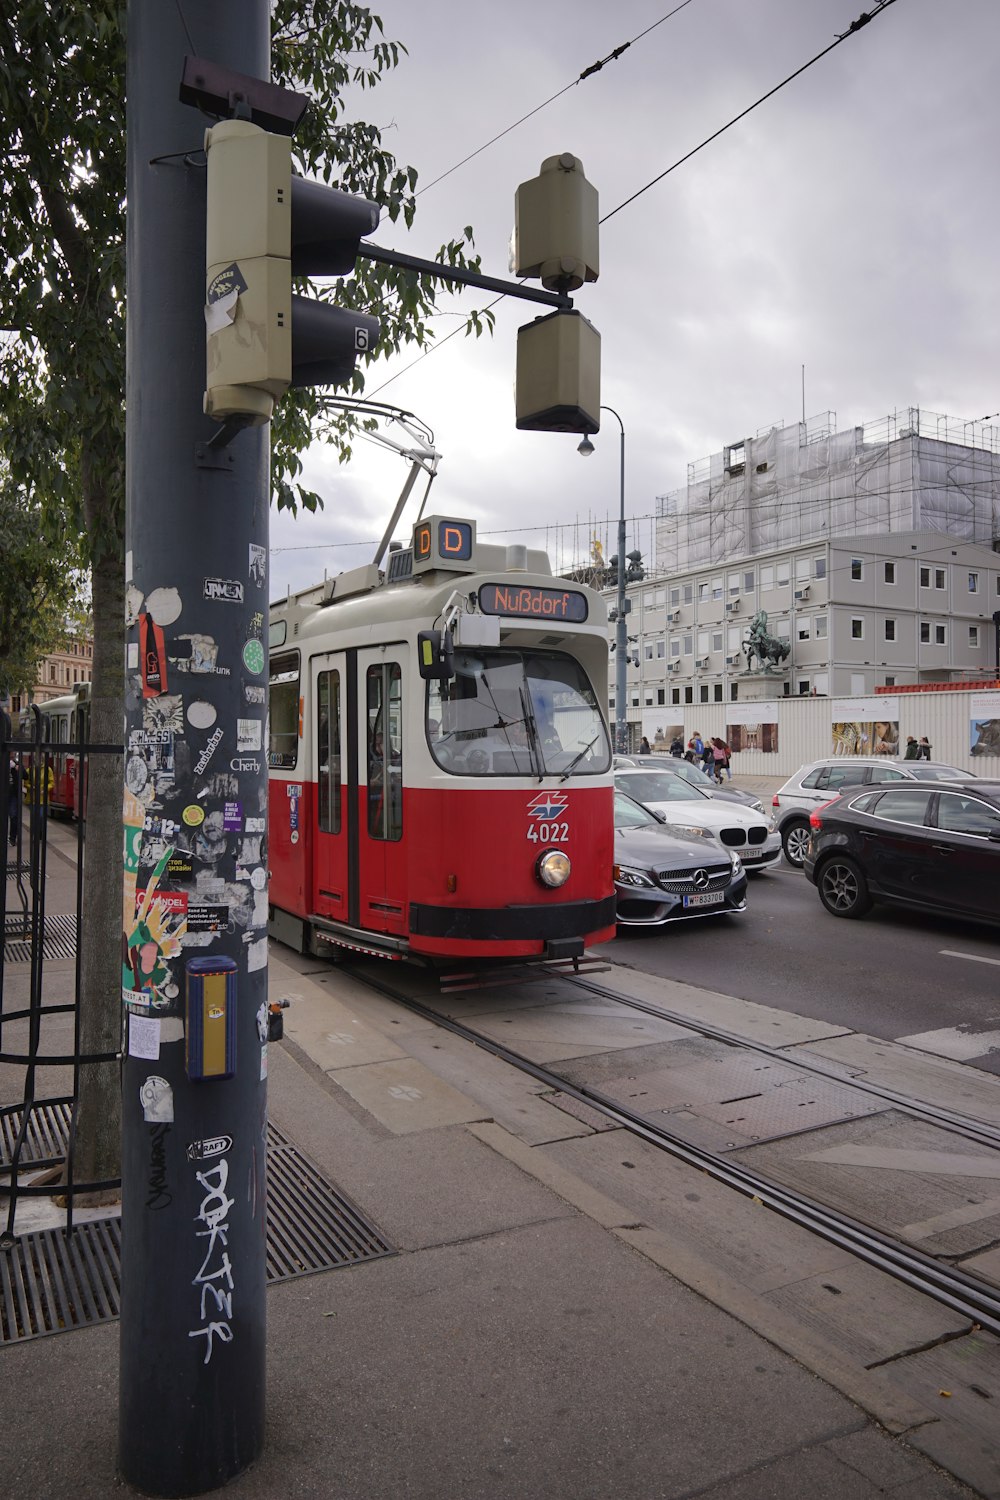 a red and white trolley on a city street